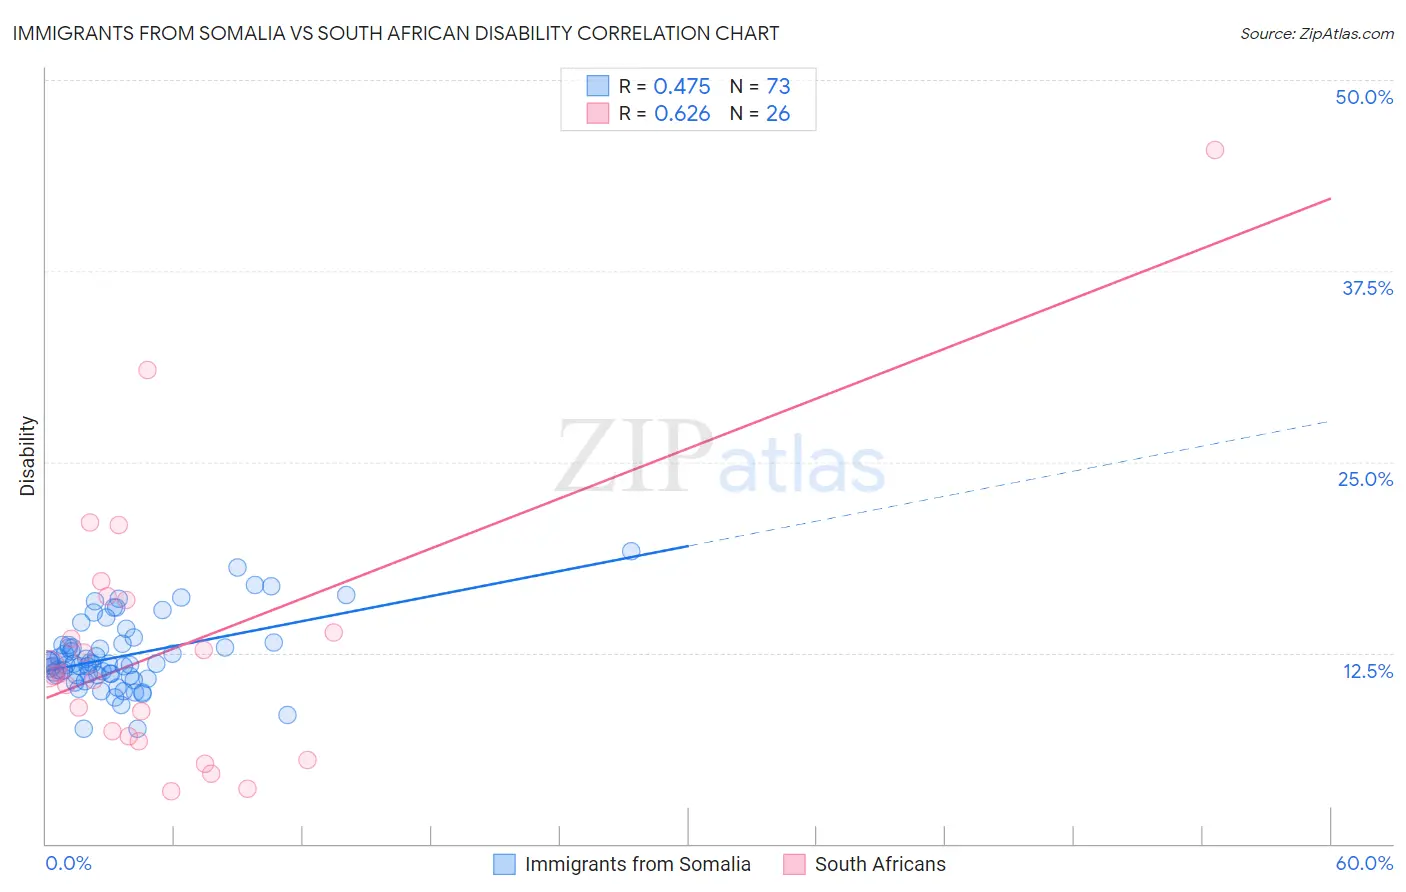 Immigrants from Somalia vs South African Disability